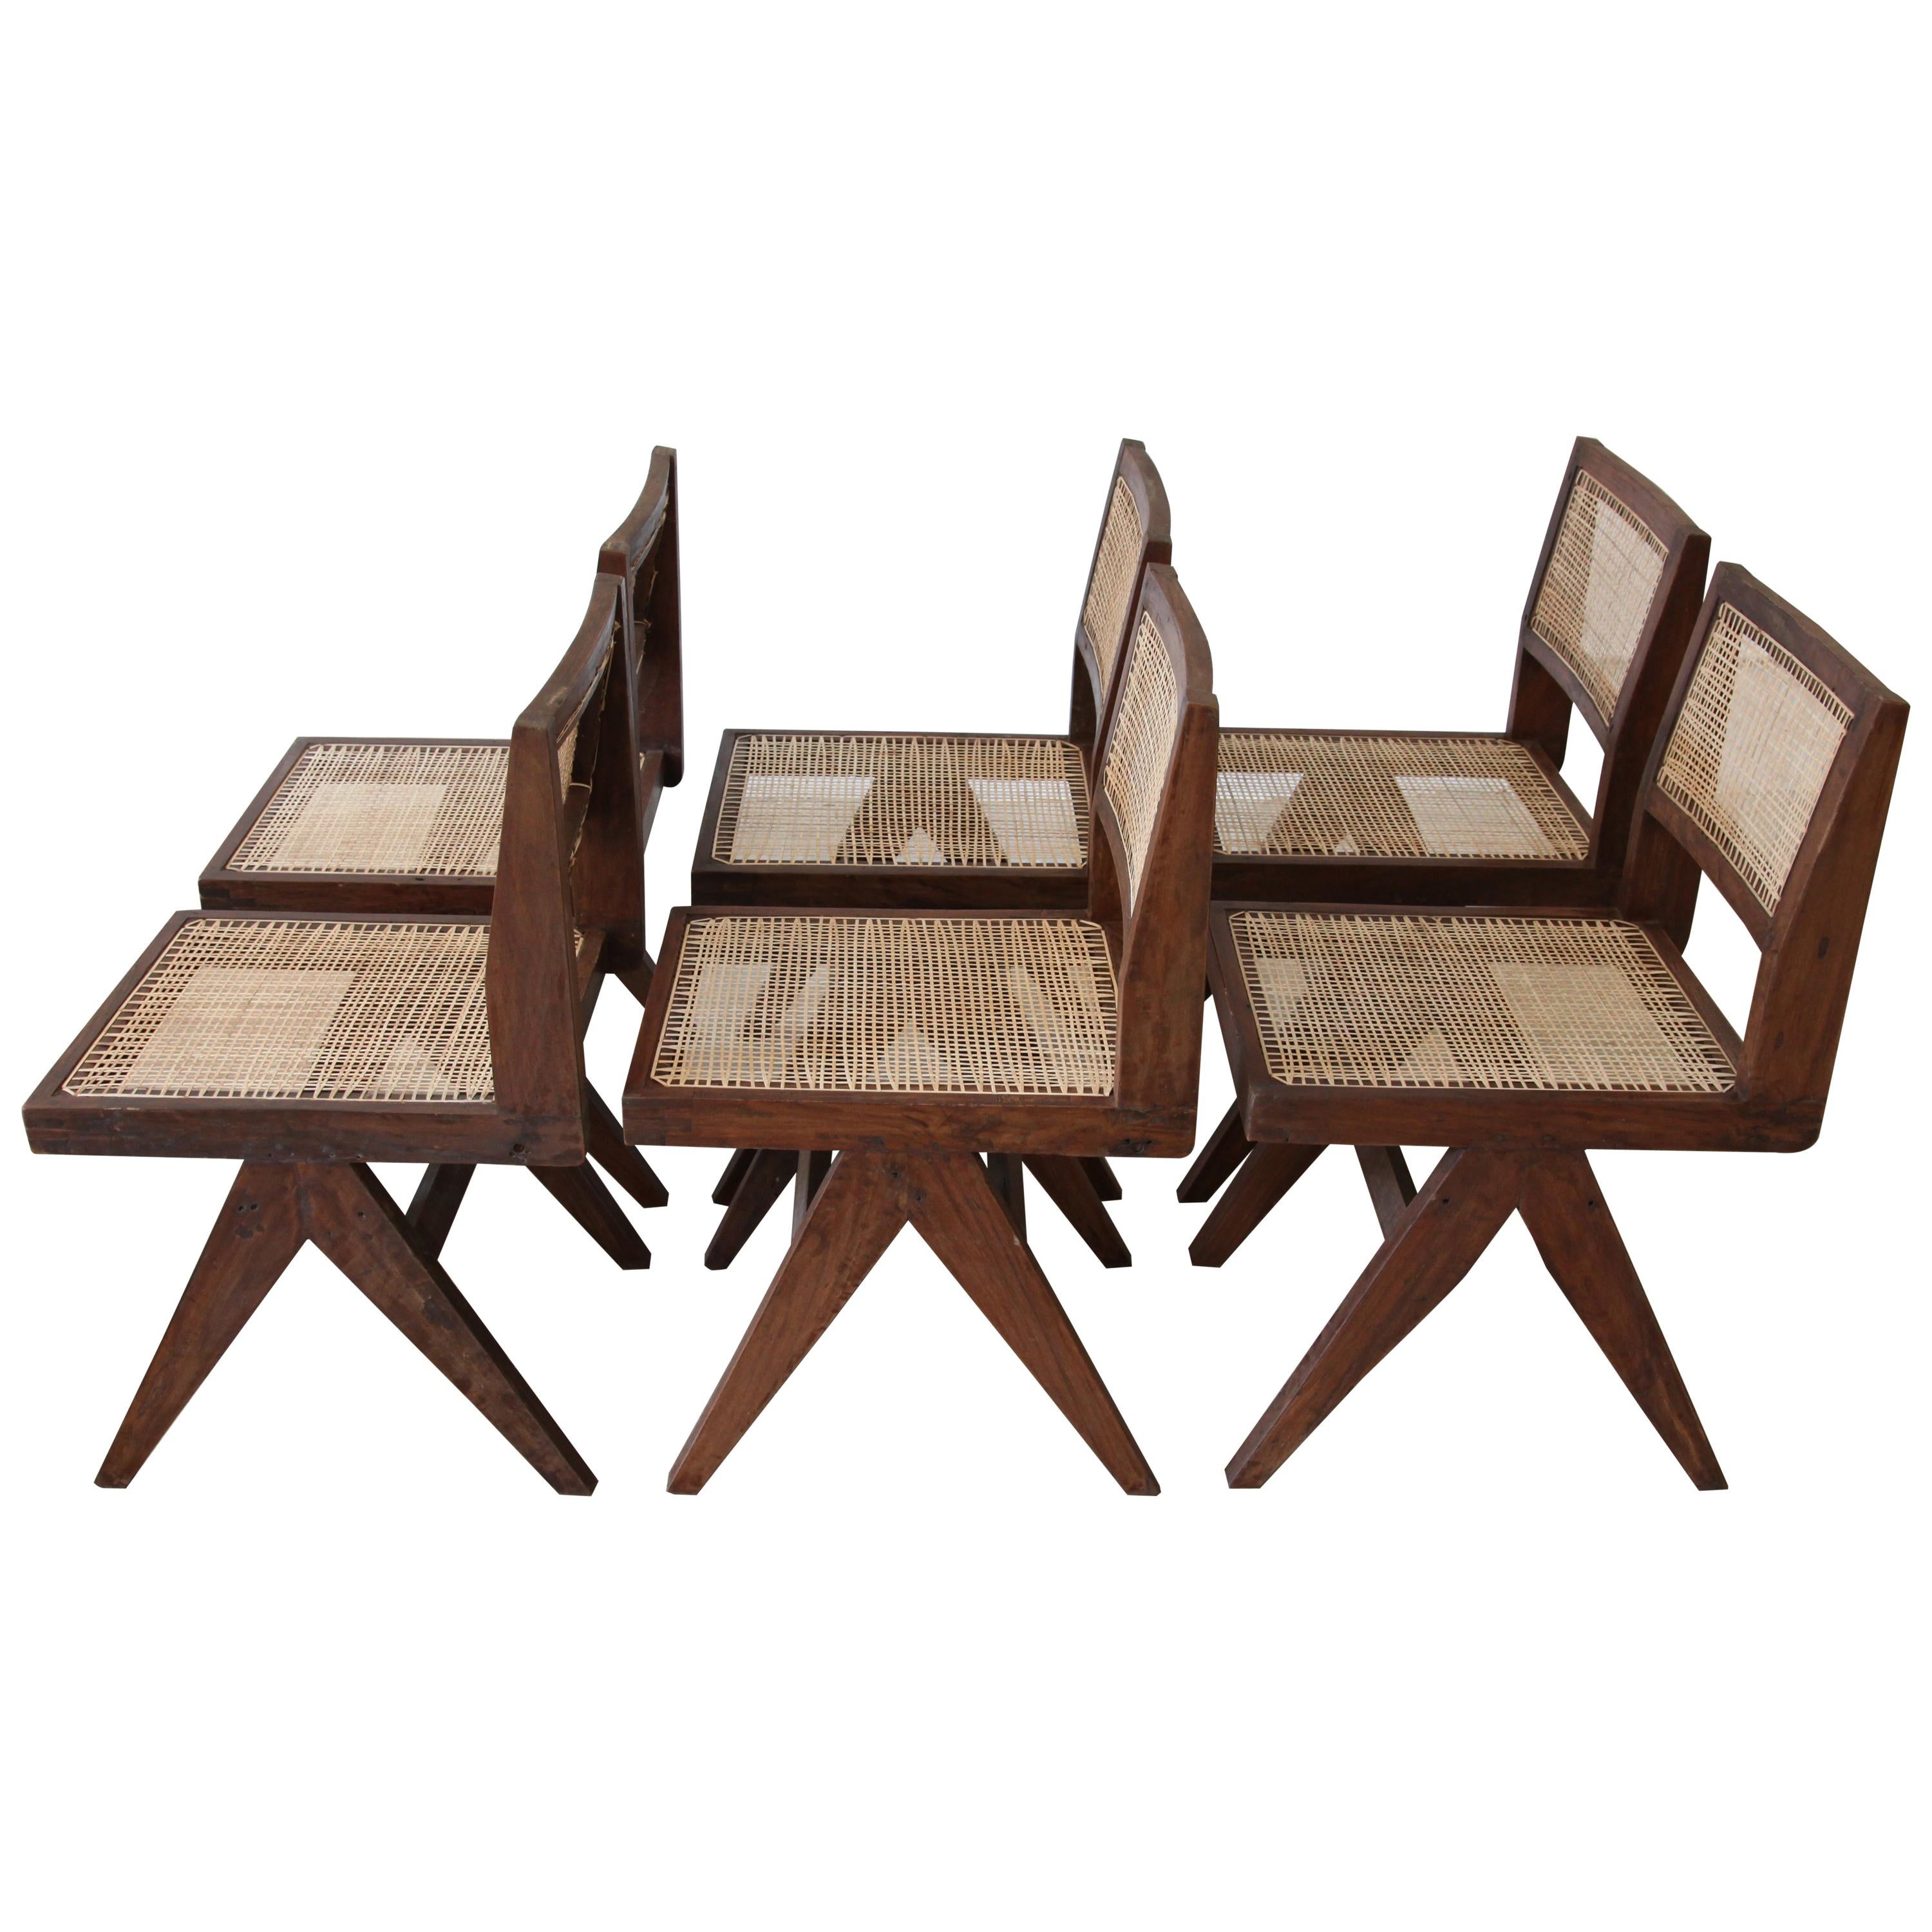 Pierre Jeanneret, Set of 8 Armless V-Leg Chairs from Chandigarh, circa 1955